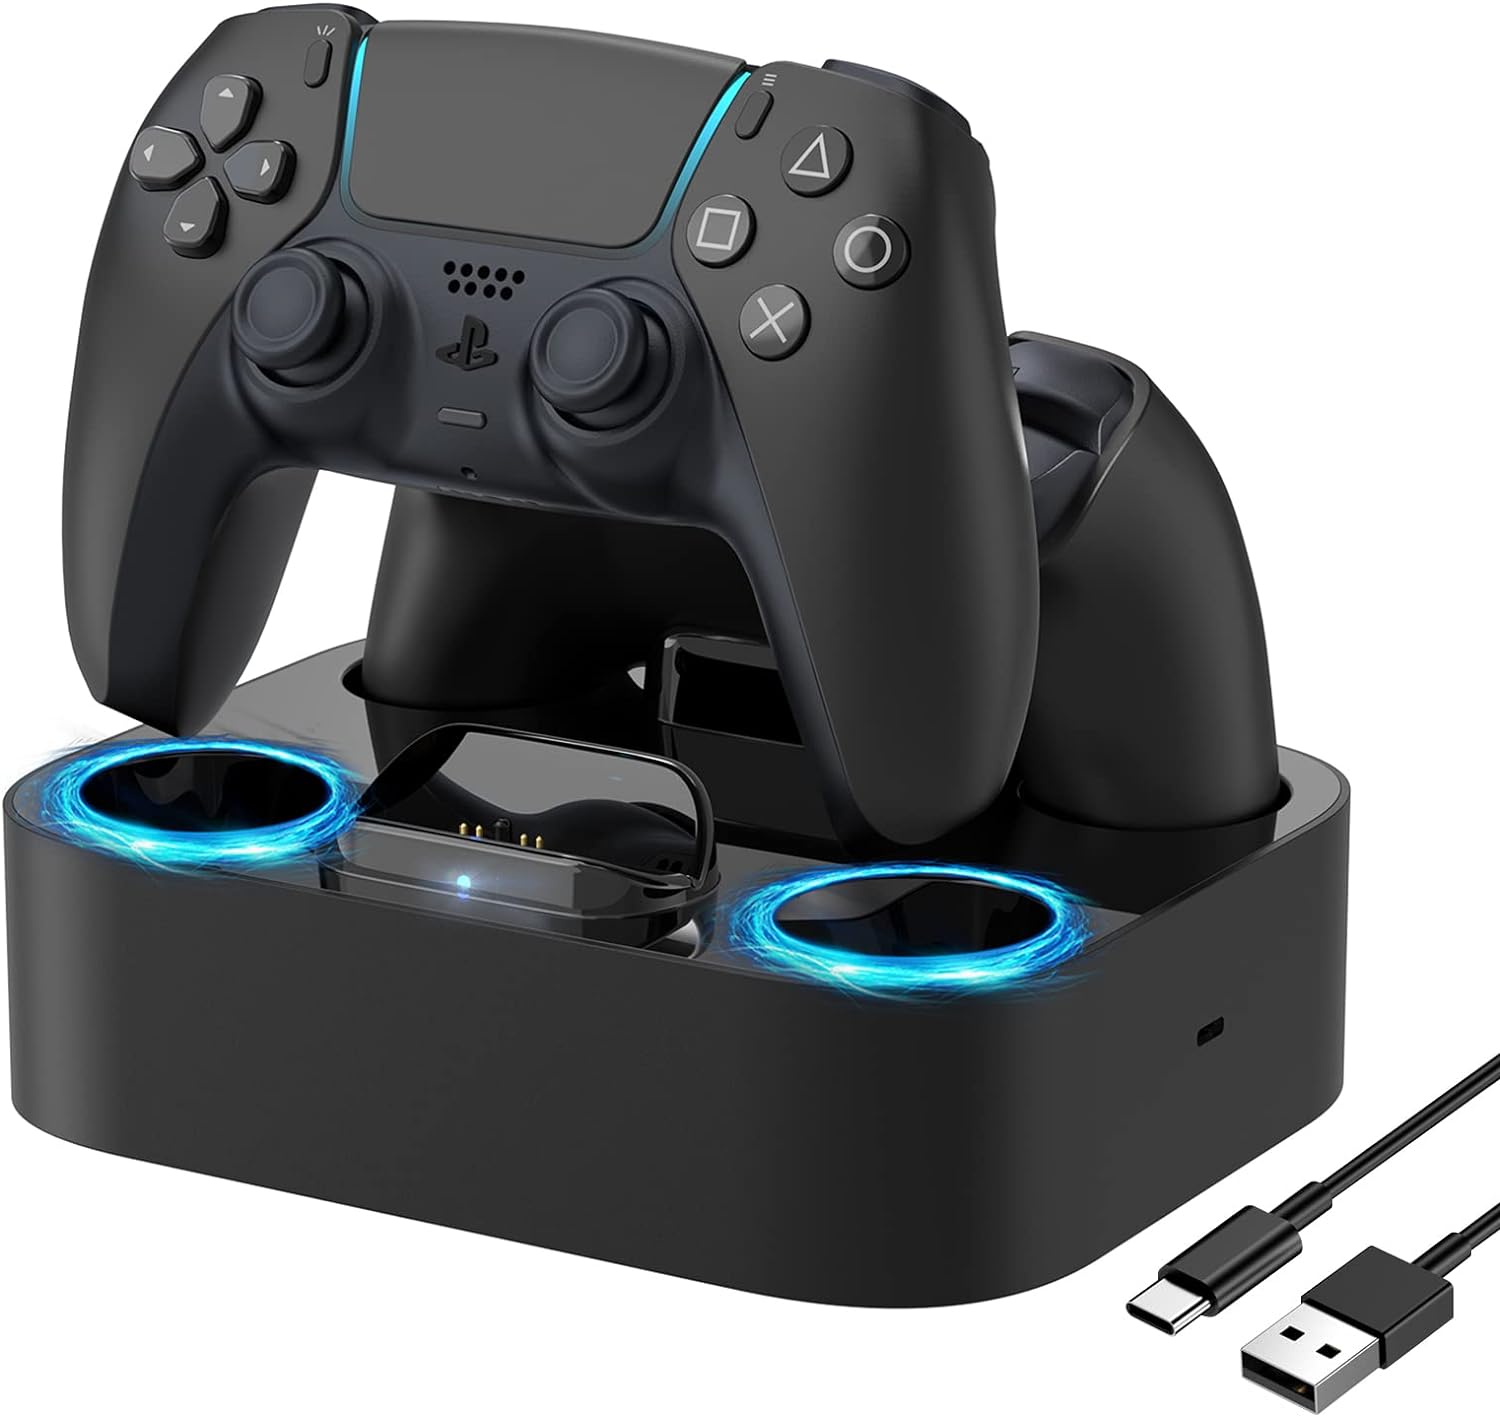 NEWDERY PS5 Controller Charger Station Compatible with Dualsense Edge Controller, Fast Charging Dock Stand with Cable, Dual Controller Charging Station for Playstation 5 & DualSense Edge Controller